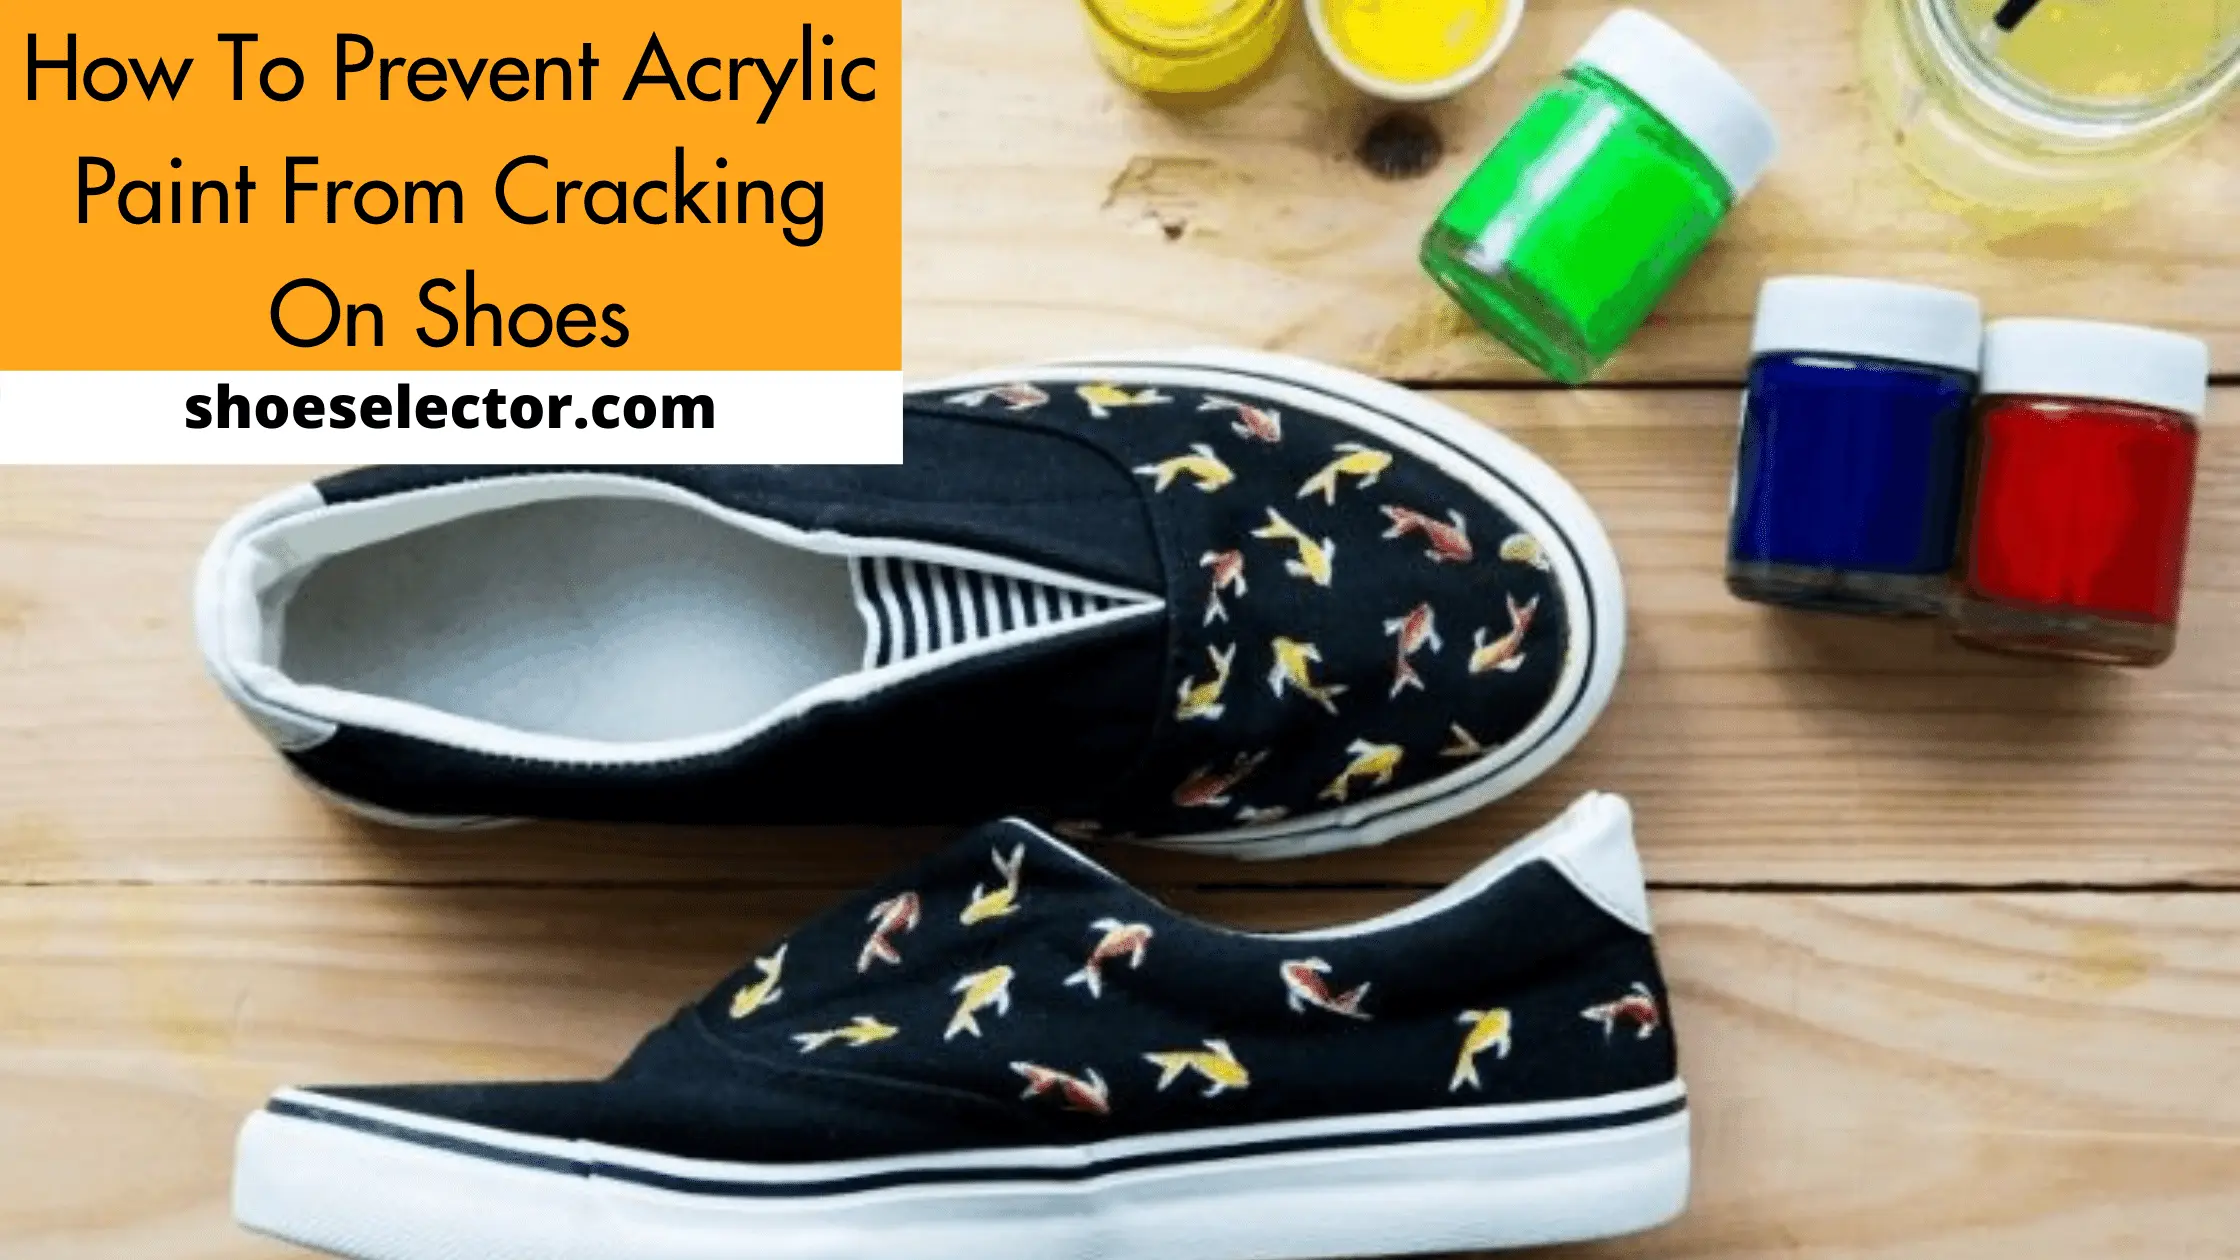 How To Prevent Acrylic Paint From Cracking On Shoes? Quick Ways